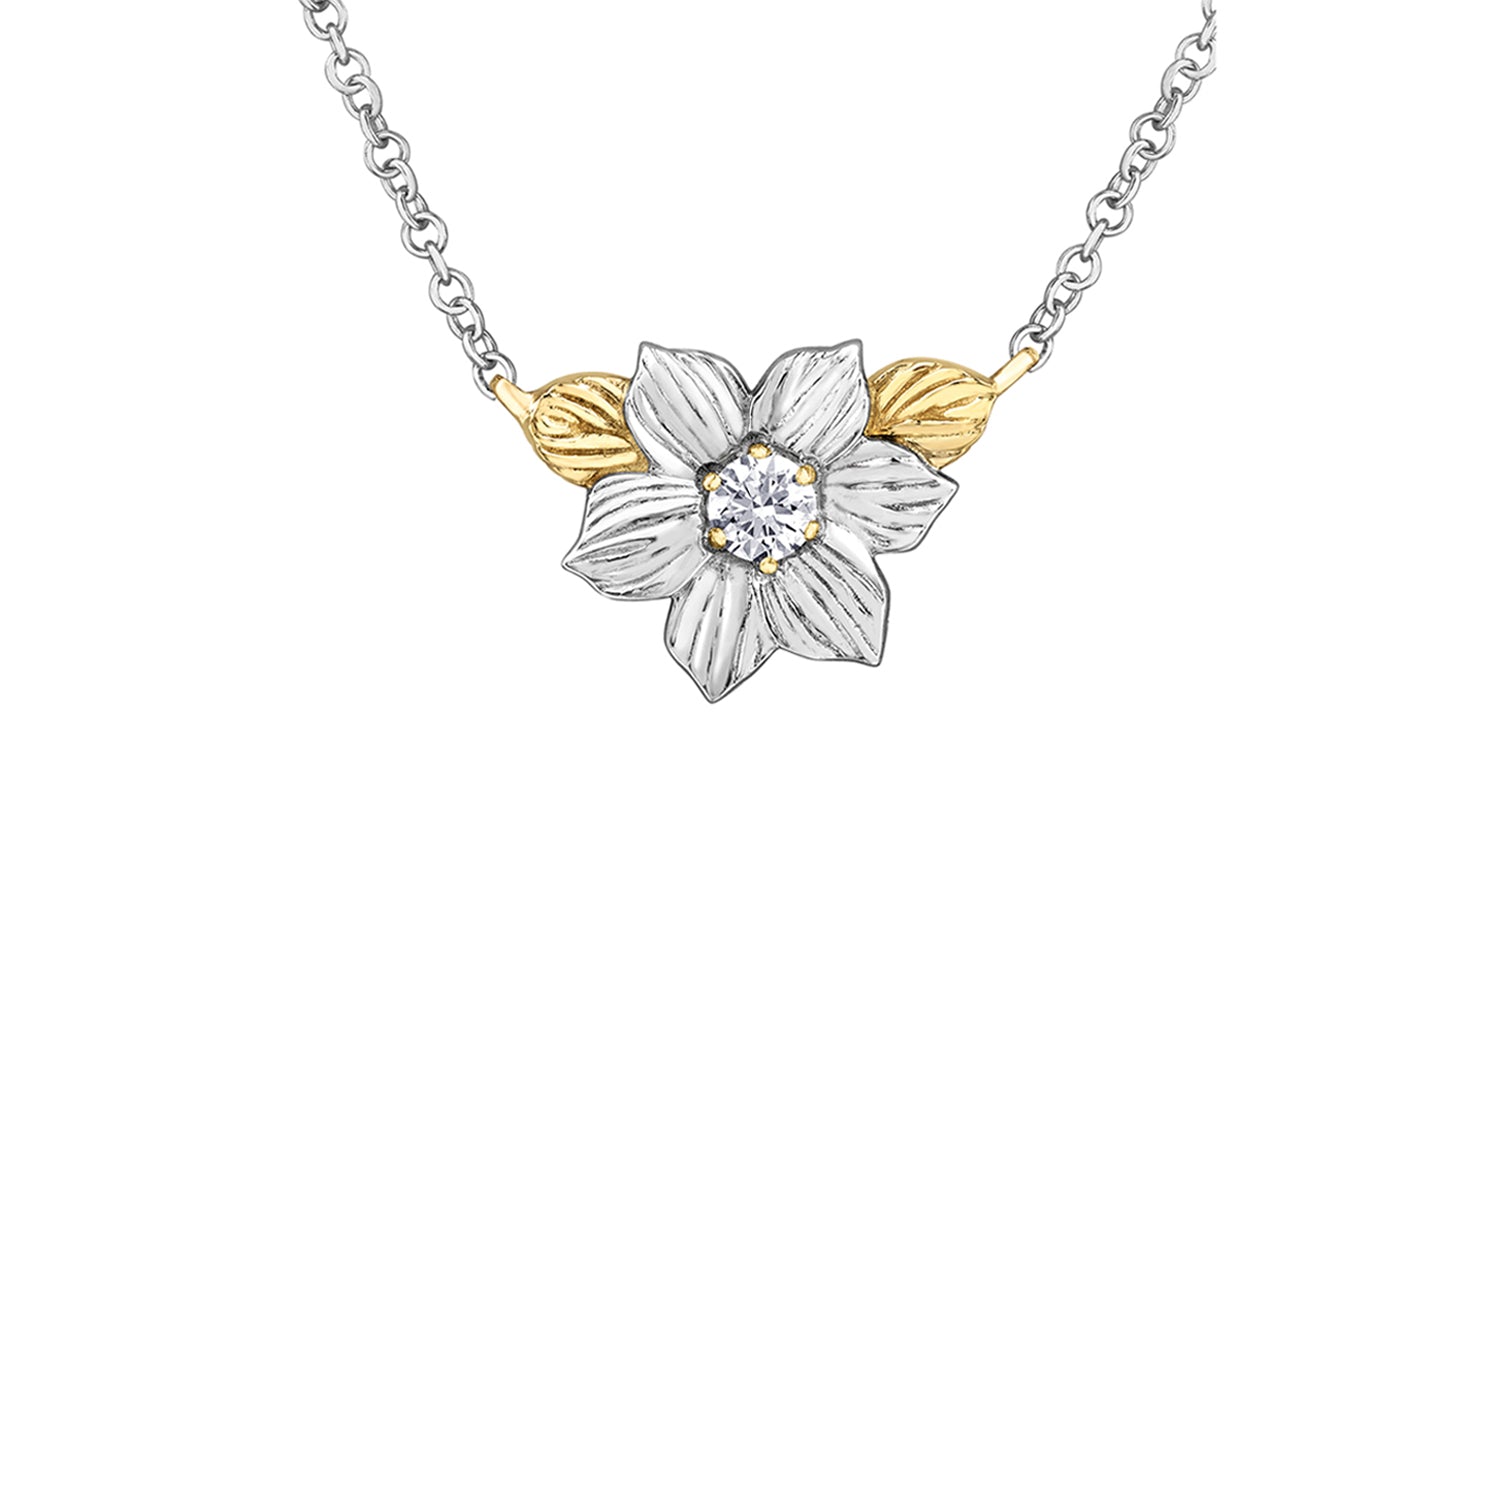 Crafted in 14KT white and yellow Certified Canadian Gold, this necklace features a British Columbia dogwood flower set with a round brilliant-cut Canadian diamond